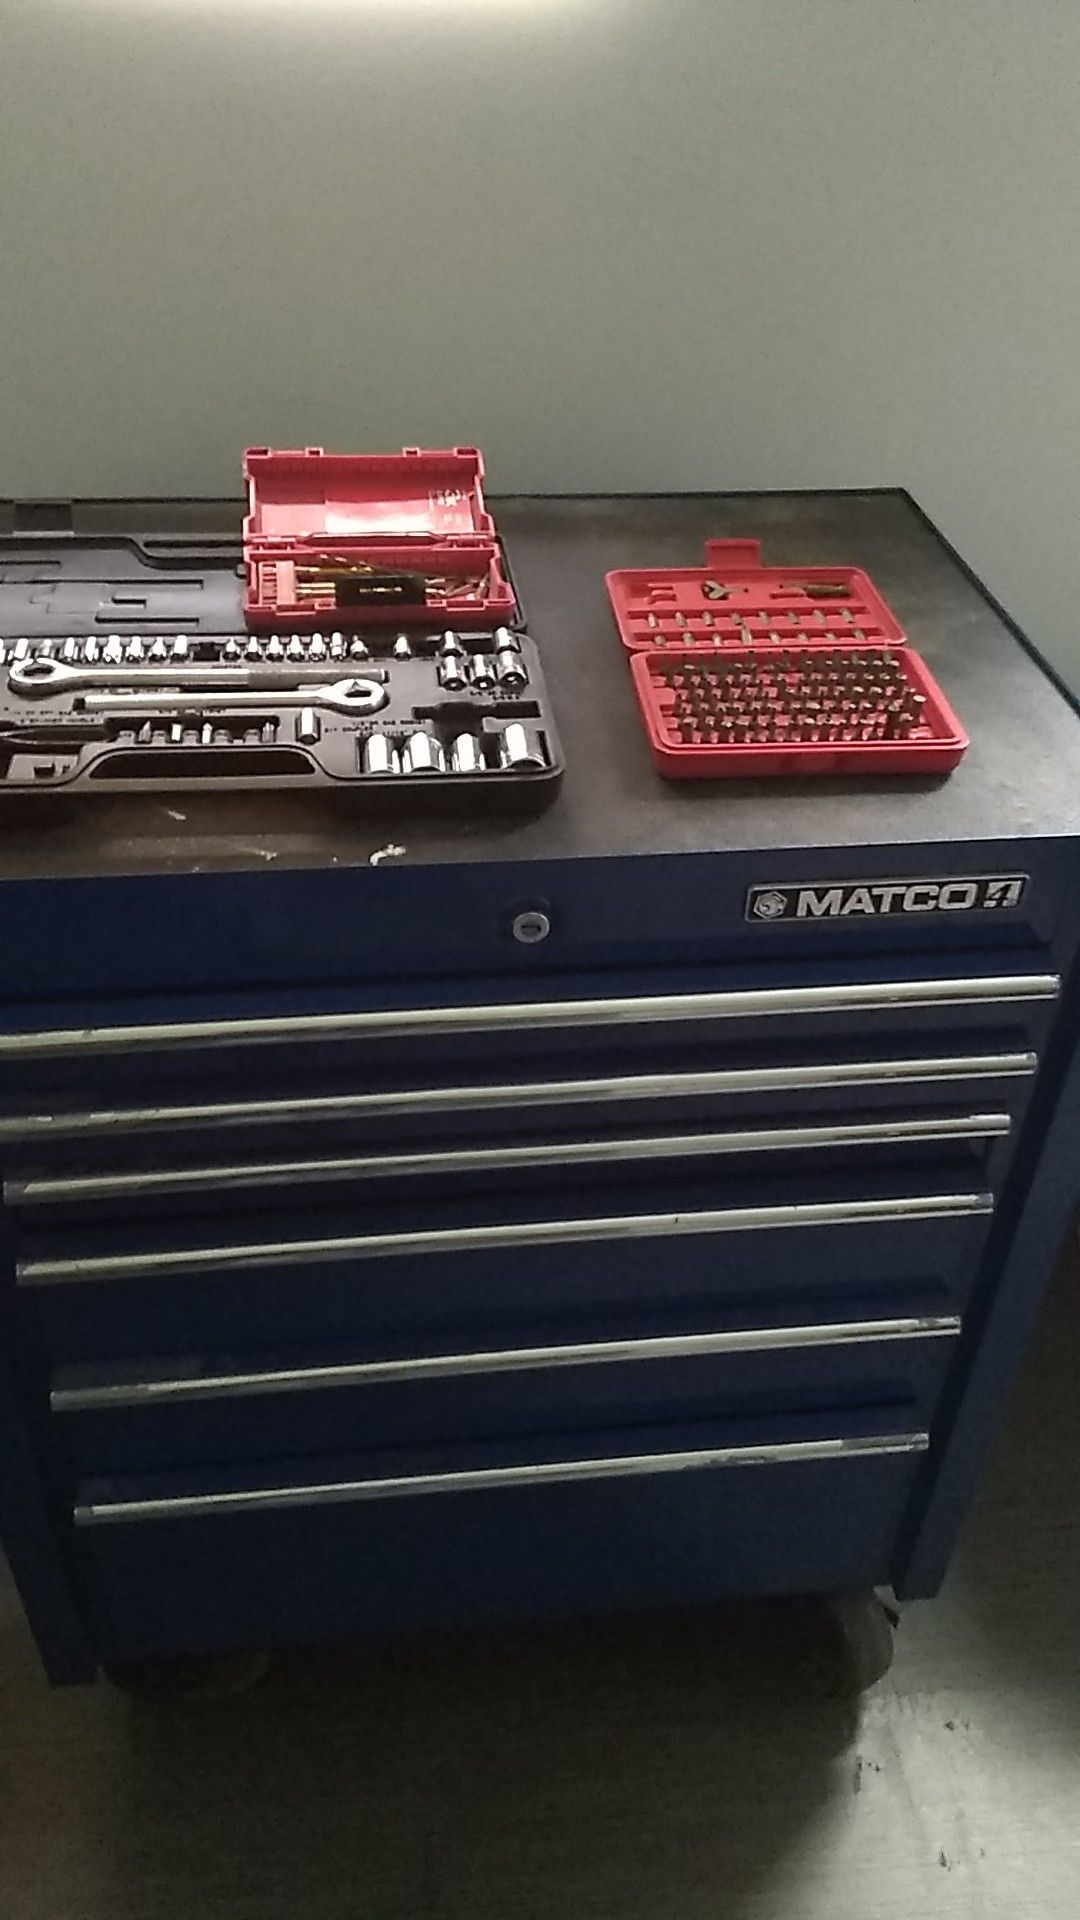 Matco 4 tool box with some tools